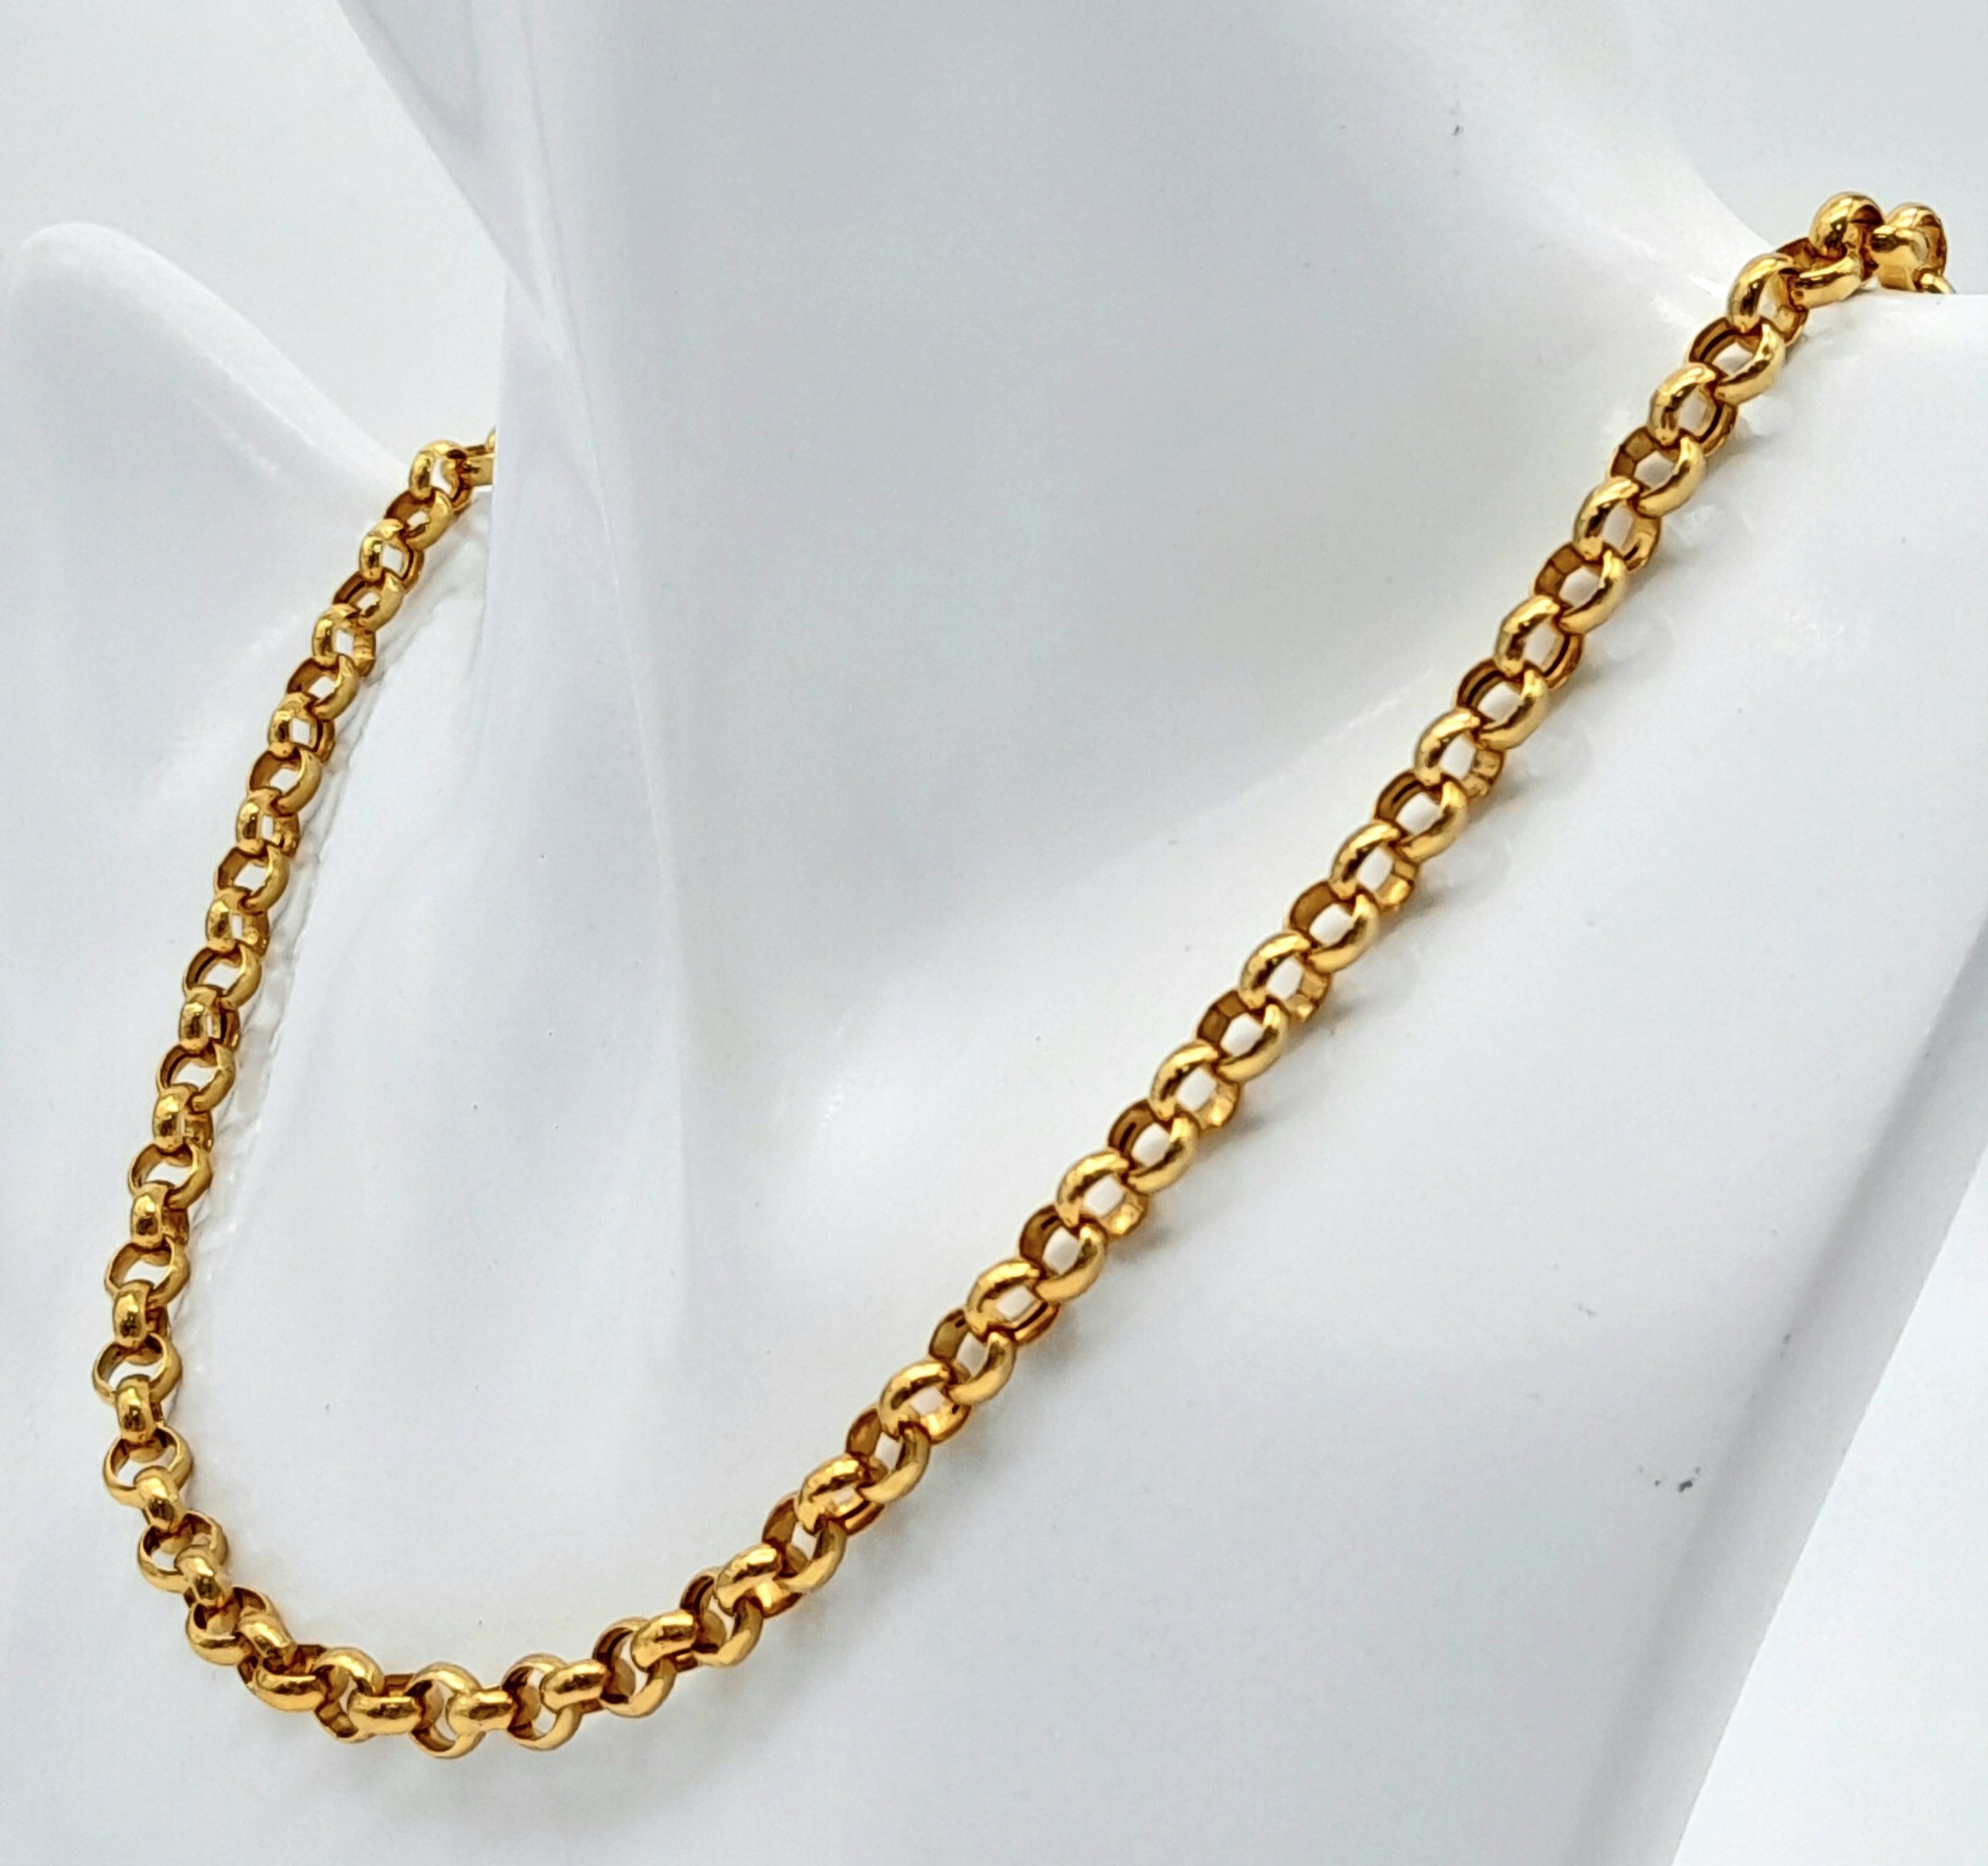 An Italian 9K Yellow Gold Belcher Chain/Necklace. 48cm. 12.2g weight. - Image 2 of 5